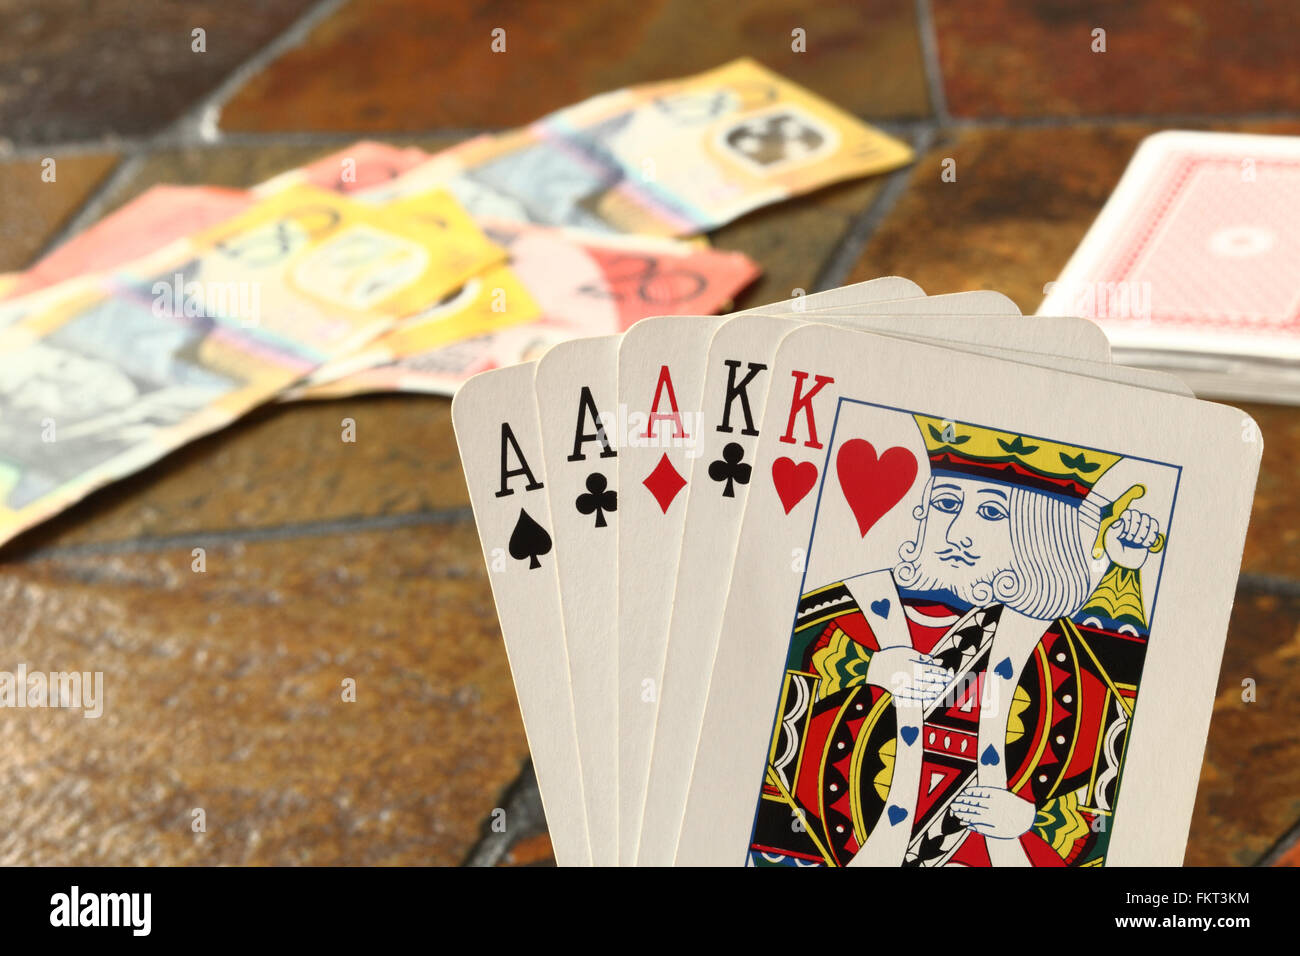 A 'Full House'  hand of cards in the foreground with Australian banknotes laying on a tiled table top Stock Photo